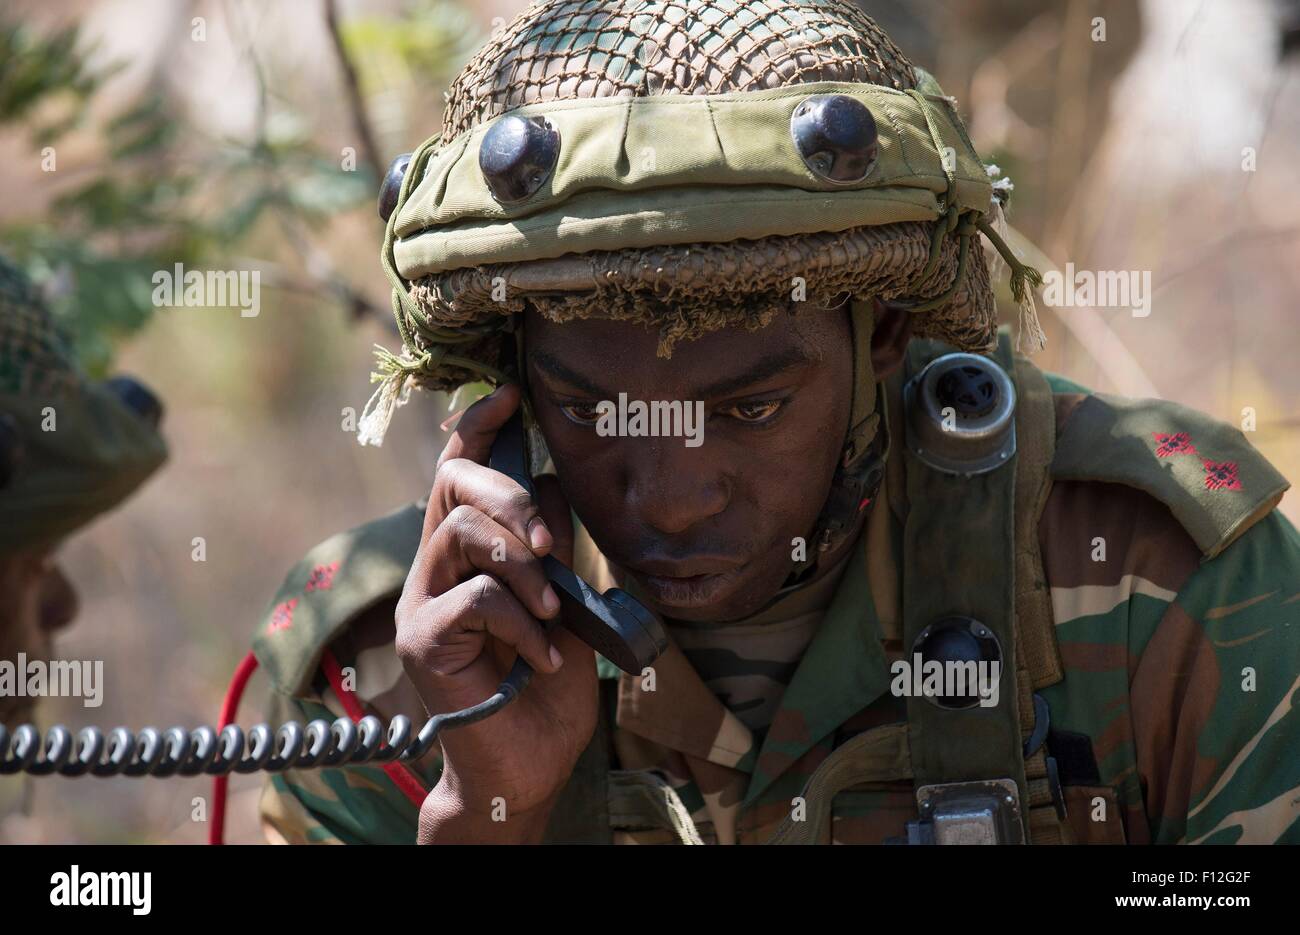 A soldier with the Zambian Defense Force during exercise Southern Accord August 13, 2015 in Lusaka, Zambia. The annual exercise is a joint peacekeeping training with the U.S. Military, United Nation allies and the Zambian Defense Forces. Stock Photo